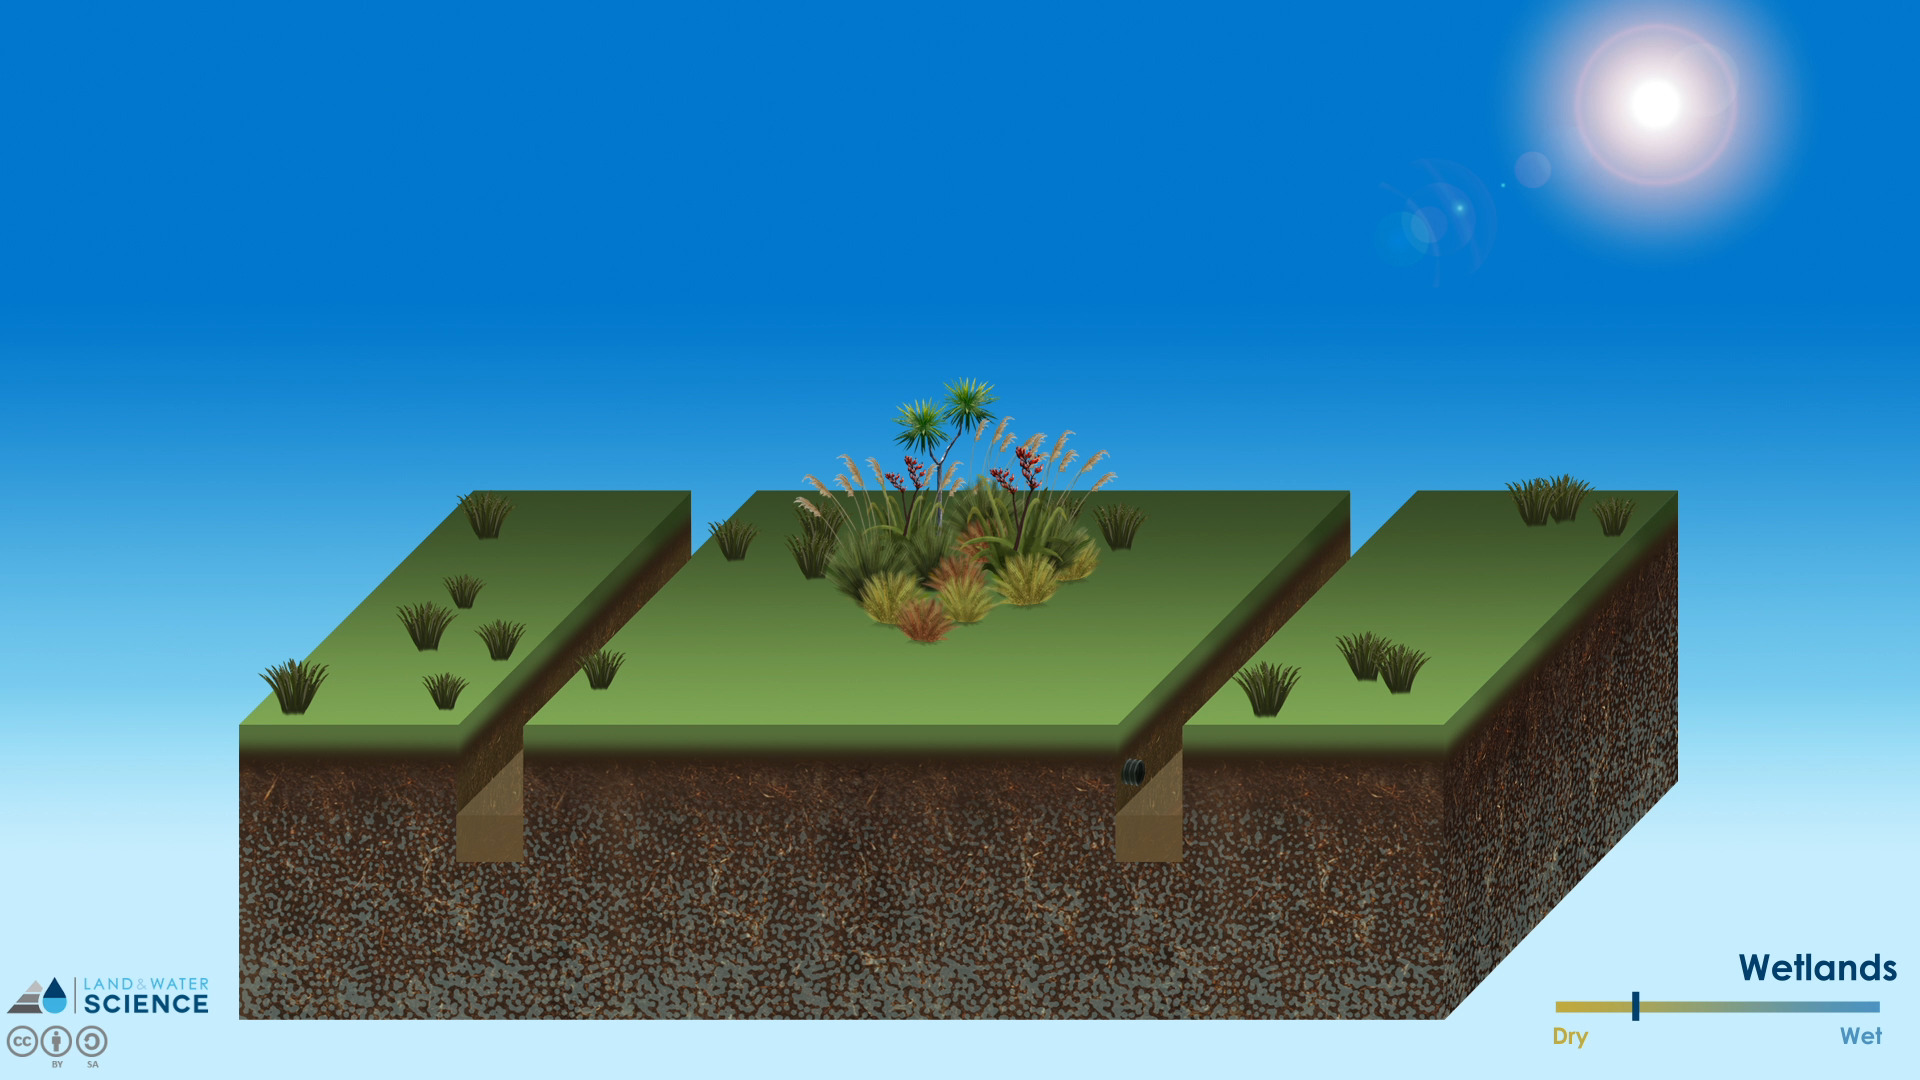 3D diagram of ditch drains running though a planted area